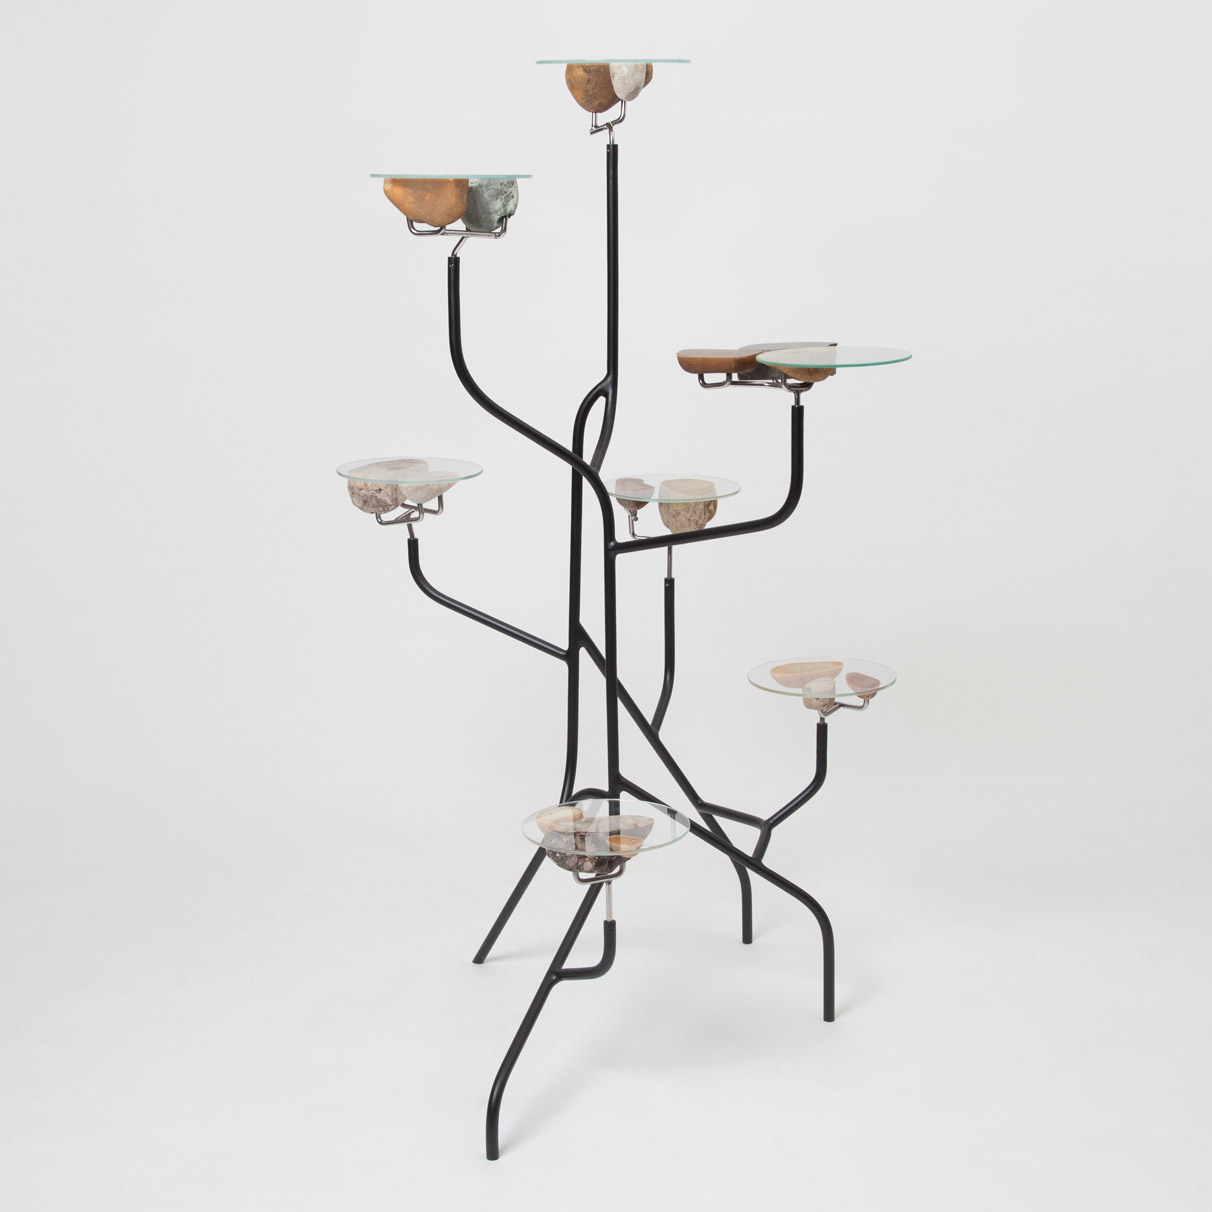 shelf made of metal tubes and glass with stone surfaces